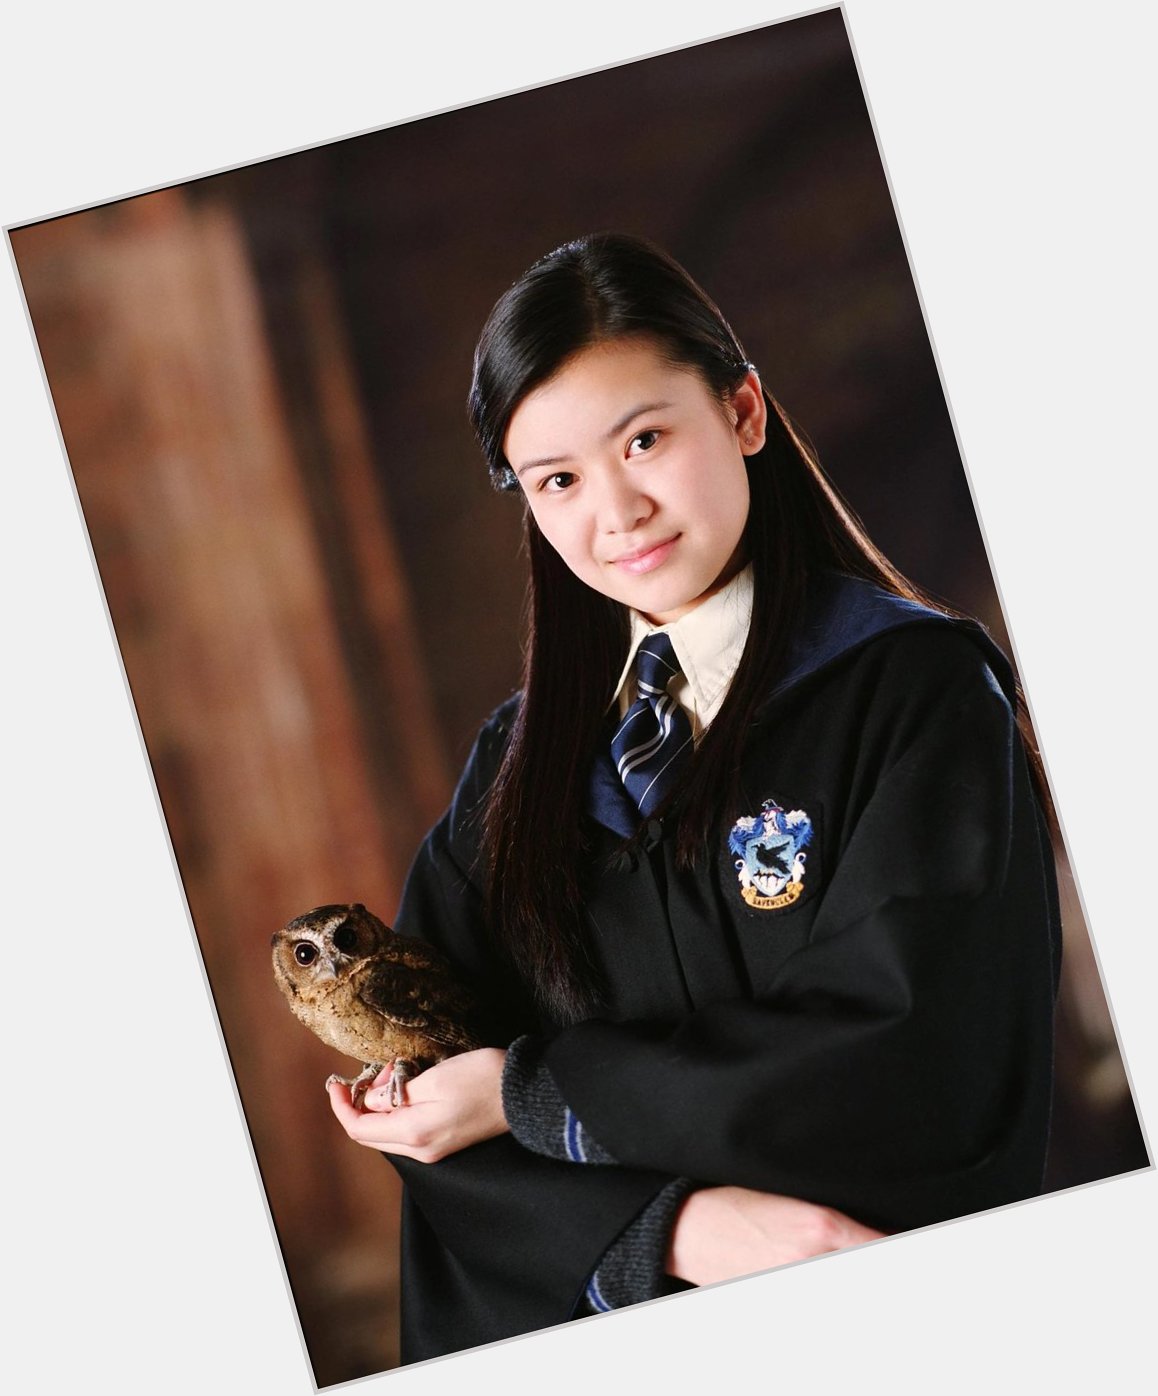  Happy birthday to Katie Leung who portrayed Cho Chang in the films! 